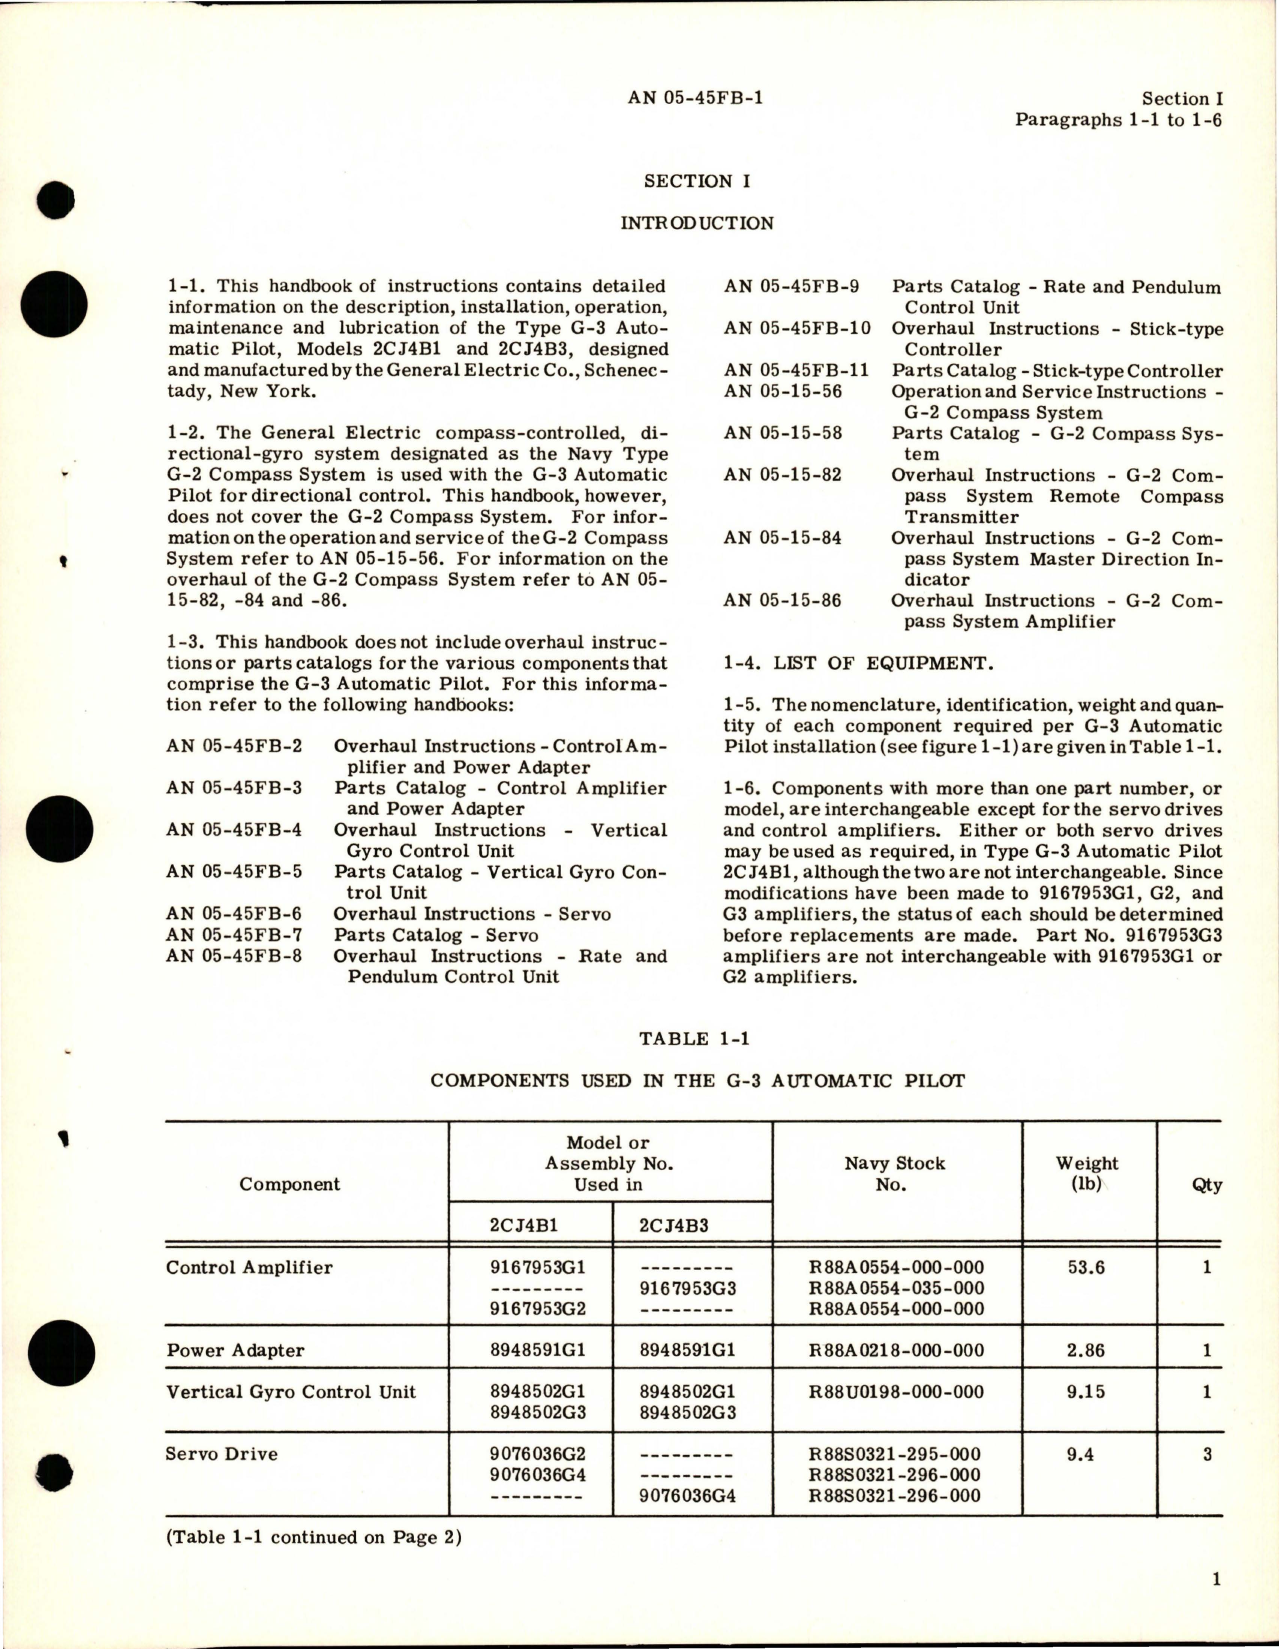 Sample page 7 from AirCorps Library document: Operation and Service Instructions for G-3 Automatic Pilot - Model 2CJ4B1 and 2CJ4B3 